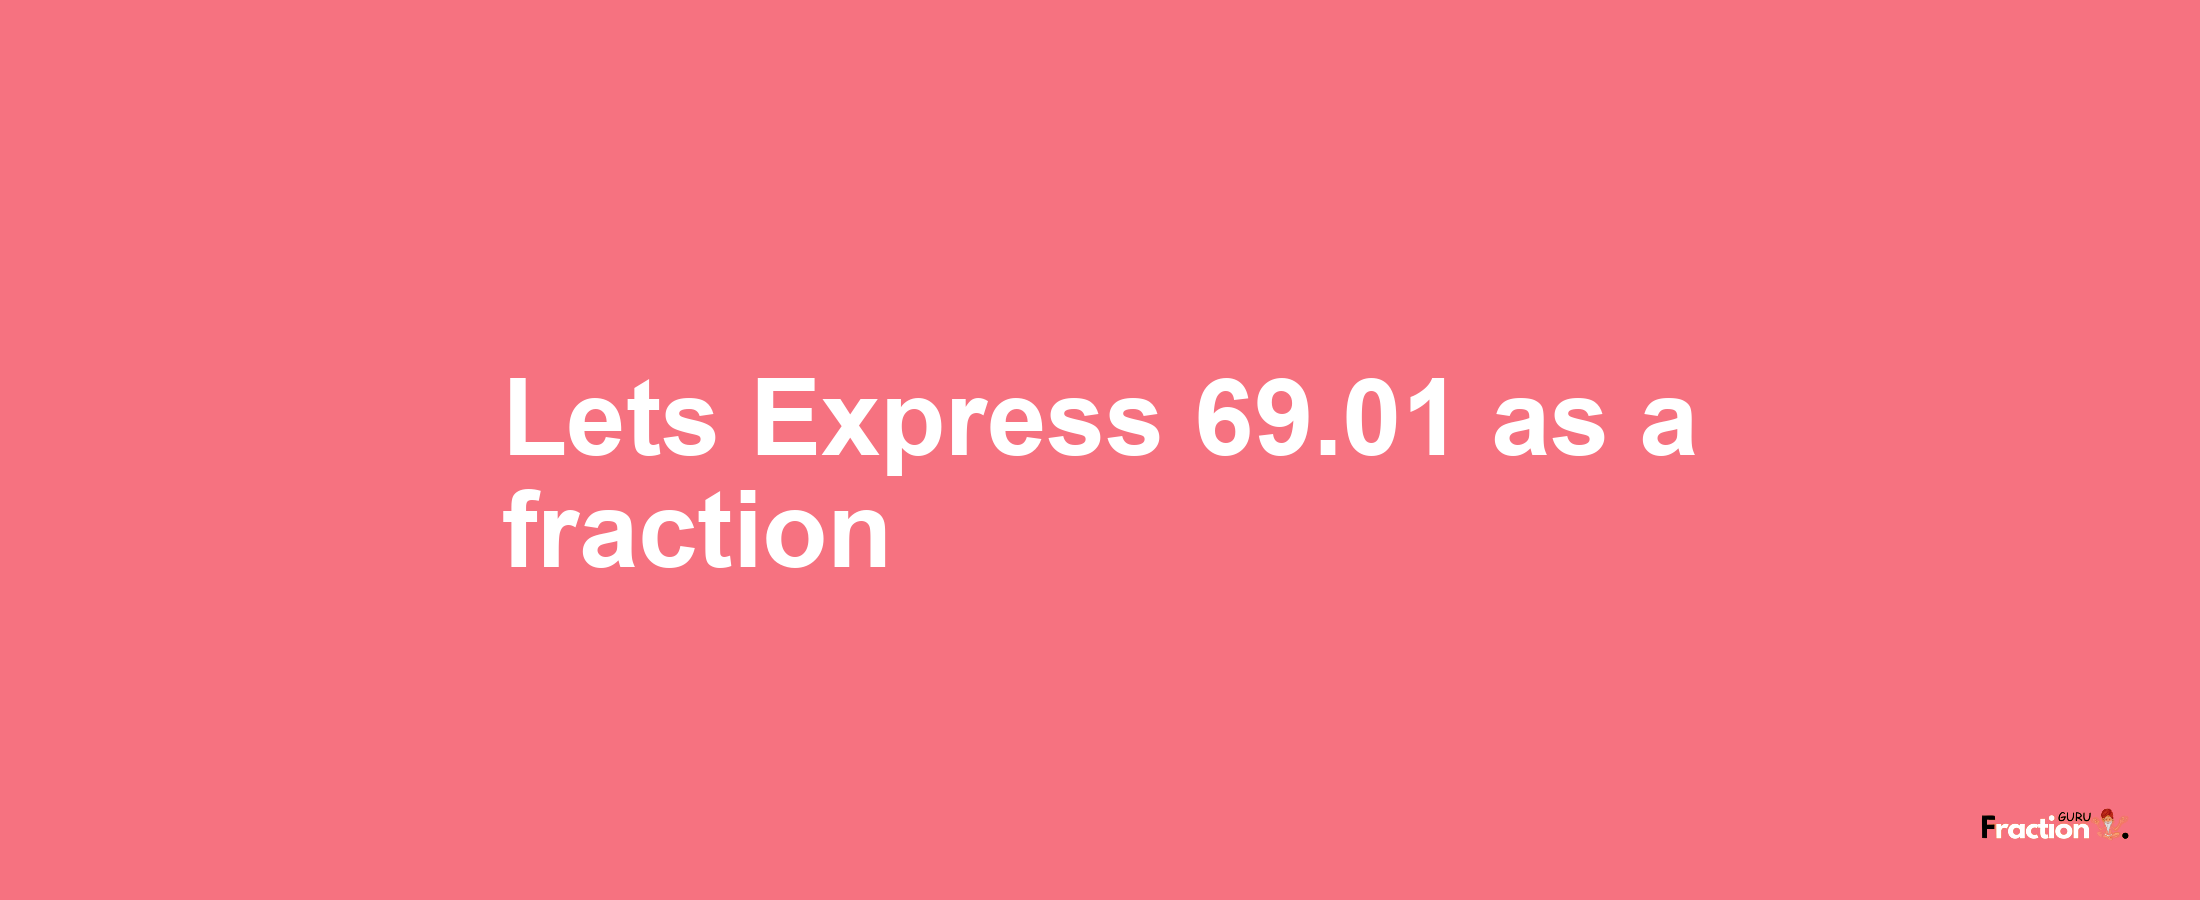 Lets Express 69.01 as afraction